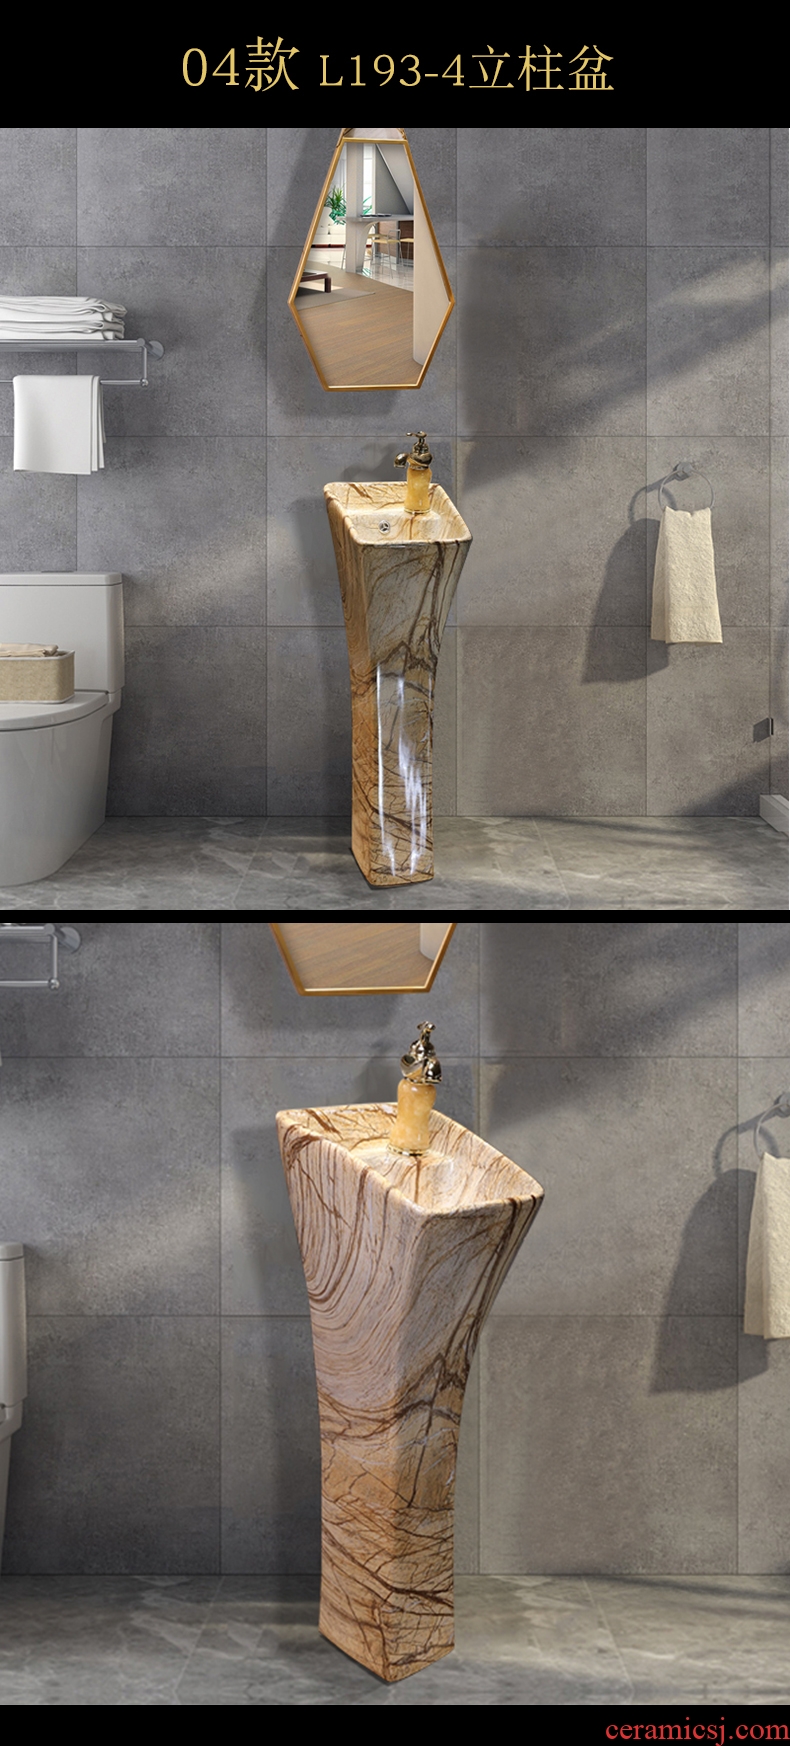 Ling yu, small family pillar basin floor ceramic lavatory small vertical integrated sink basin to Europe type column